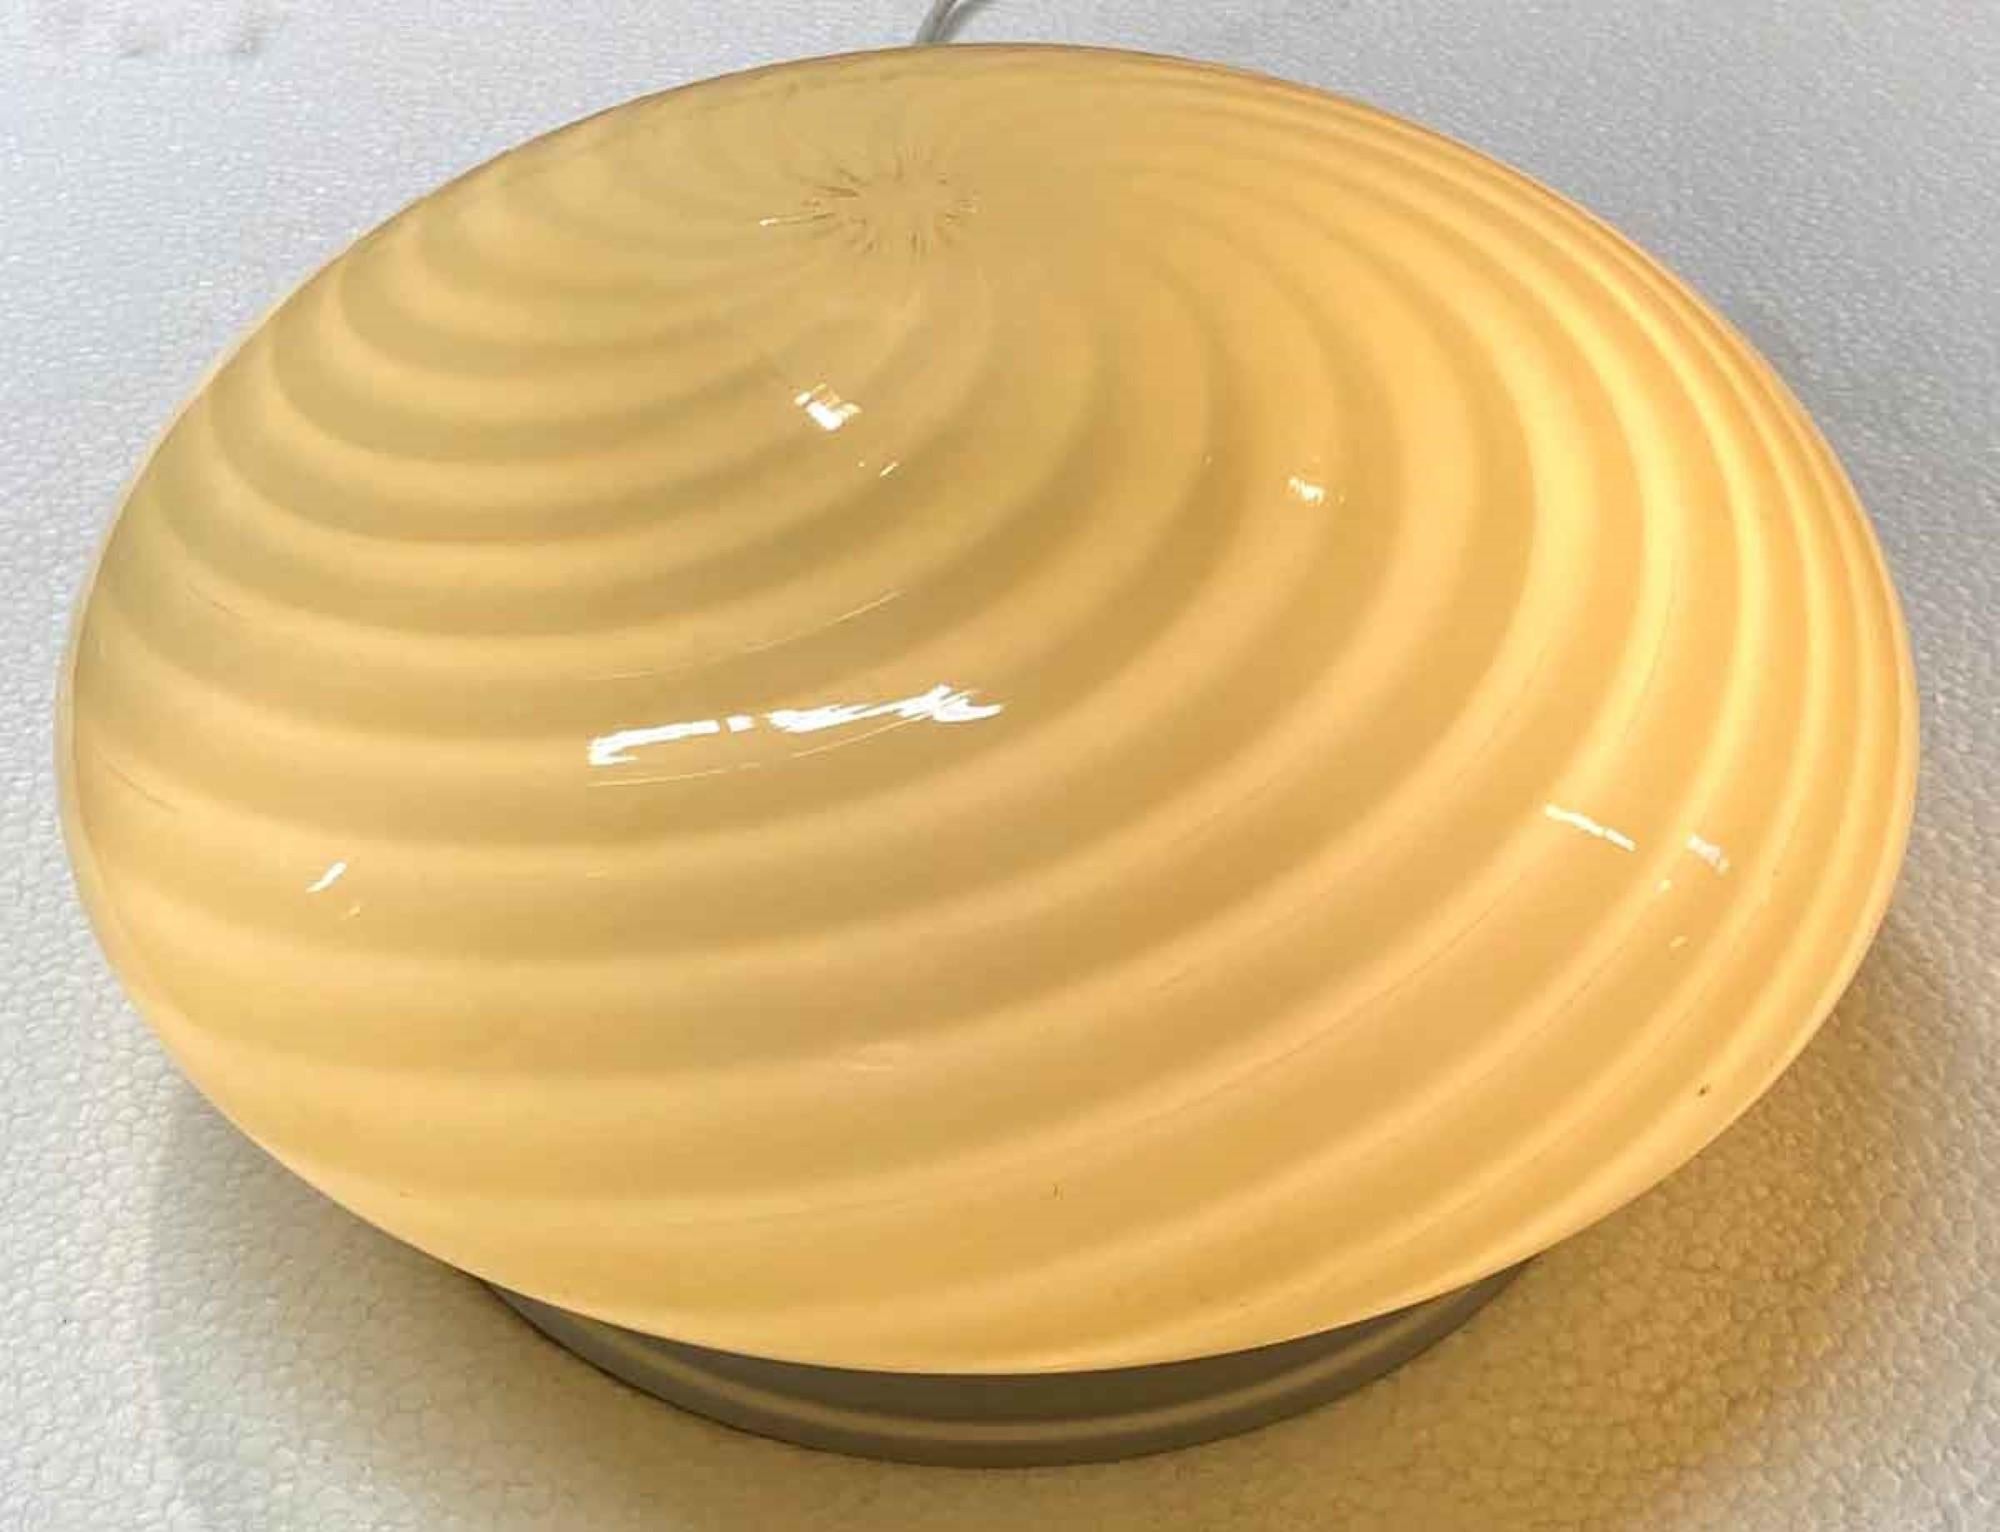 1980s hand blown Mid-Century Modern round glass fixture by Vetri Murano. This light requires two bulbs, 60 watts max. Cleaned and rewired. Small quantity available at time of posting. Priced each. Please inquire. Please note, this item is located in